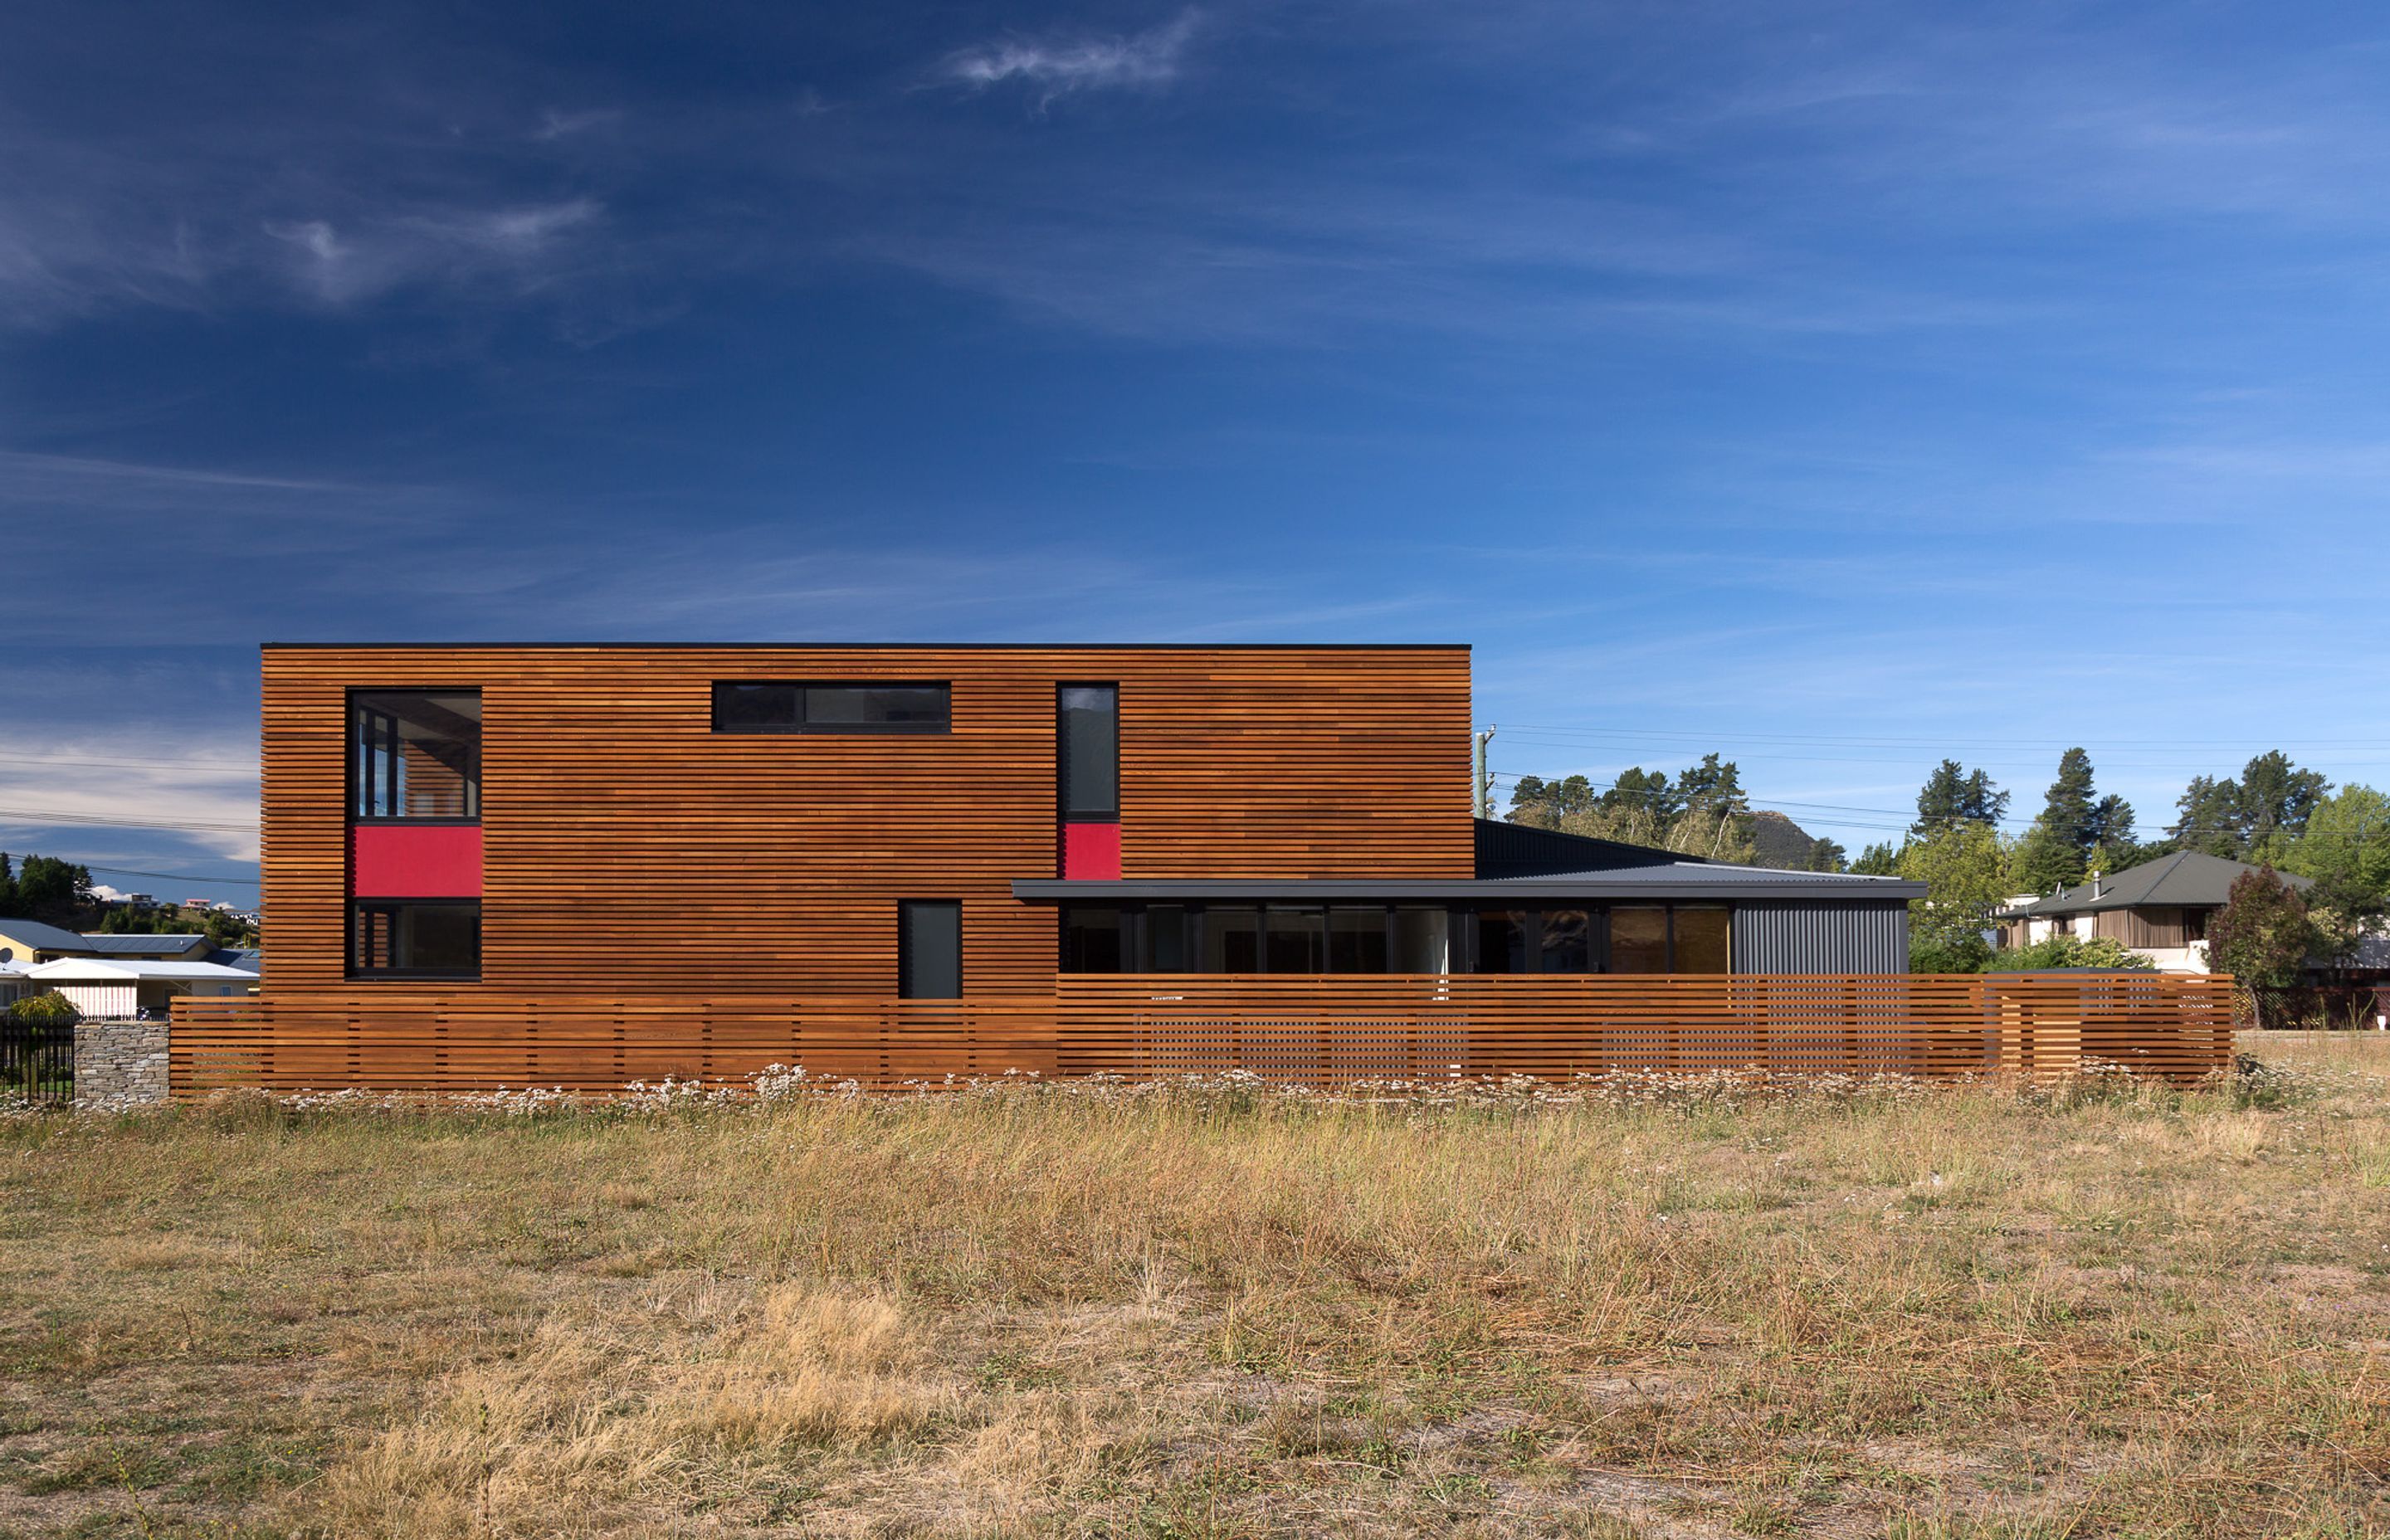 While the majority of the house is clad in horizontal cedar battens, details such as the window frames, flashing and chimney caps are in black metal with ‘pops’ of red—a nod to the De Stijl school of design..